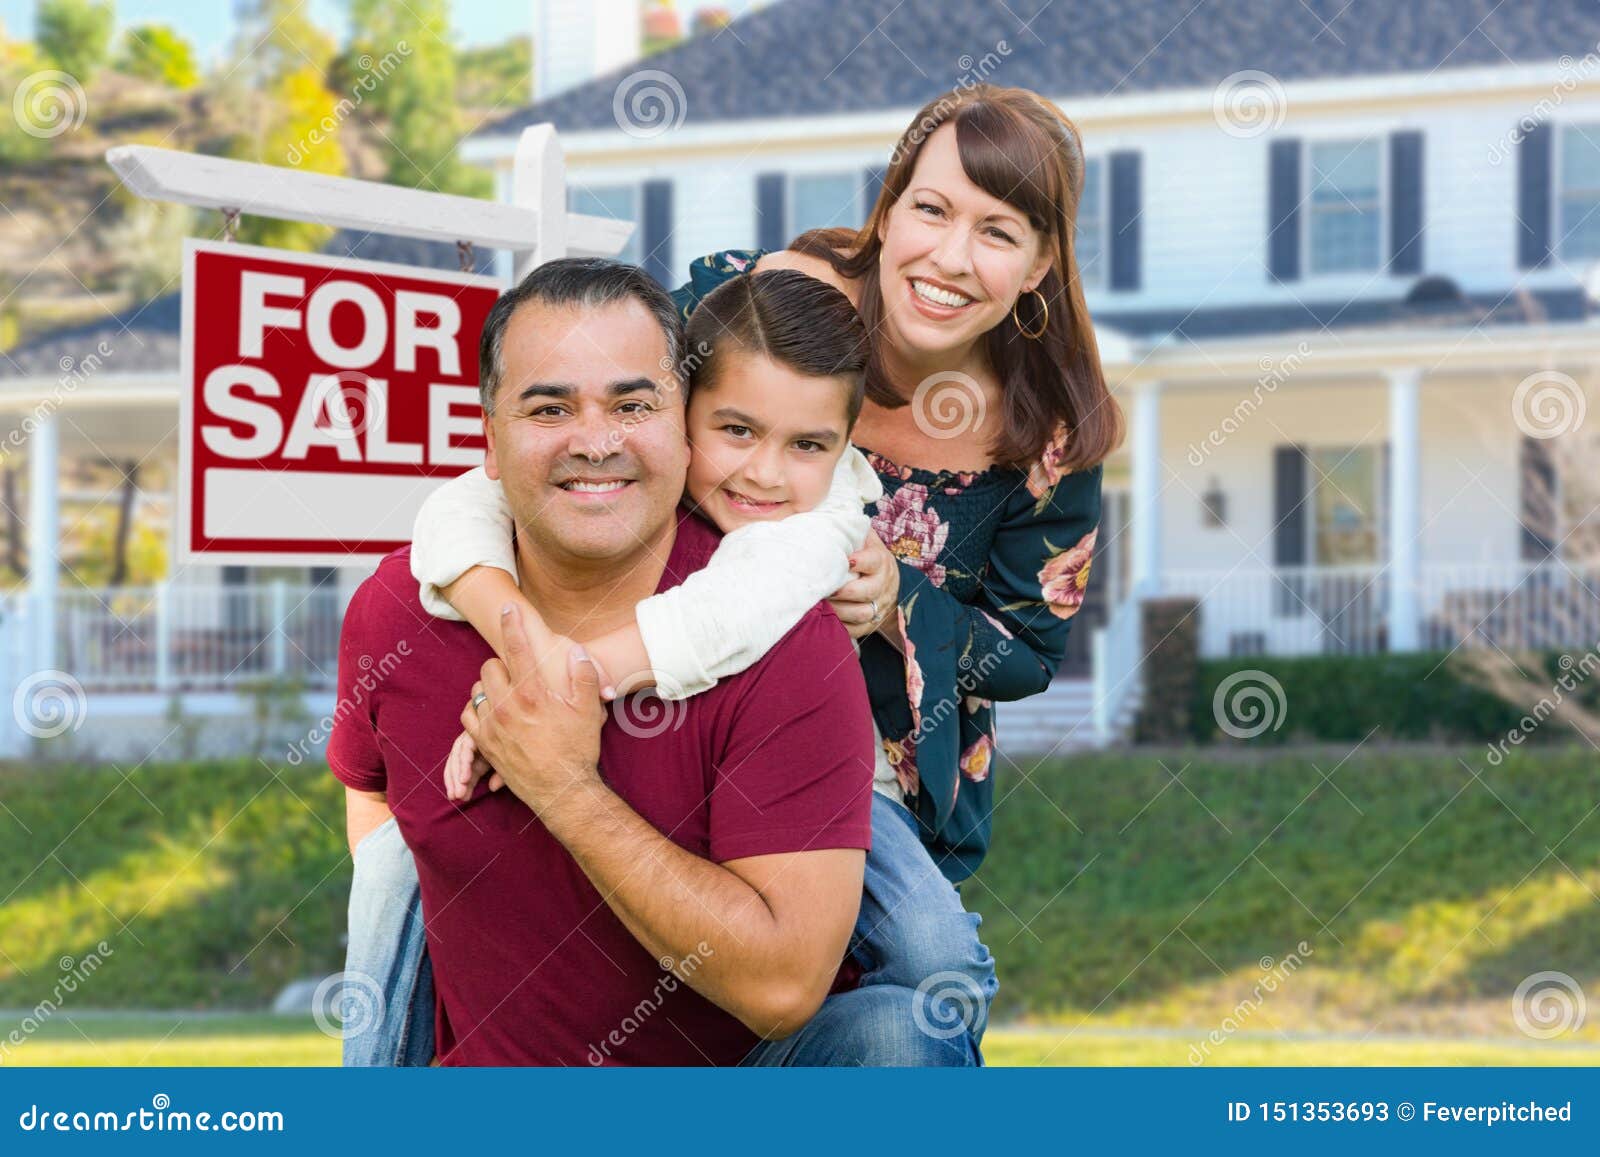 happy mixed race family in front of house and for sale real estate sign